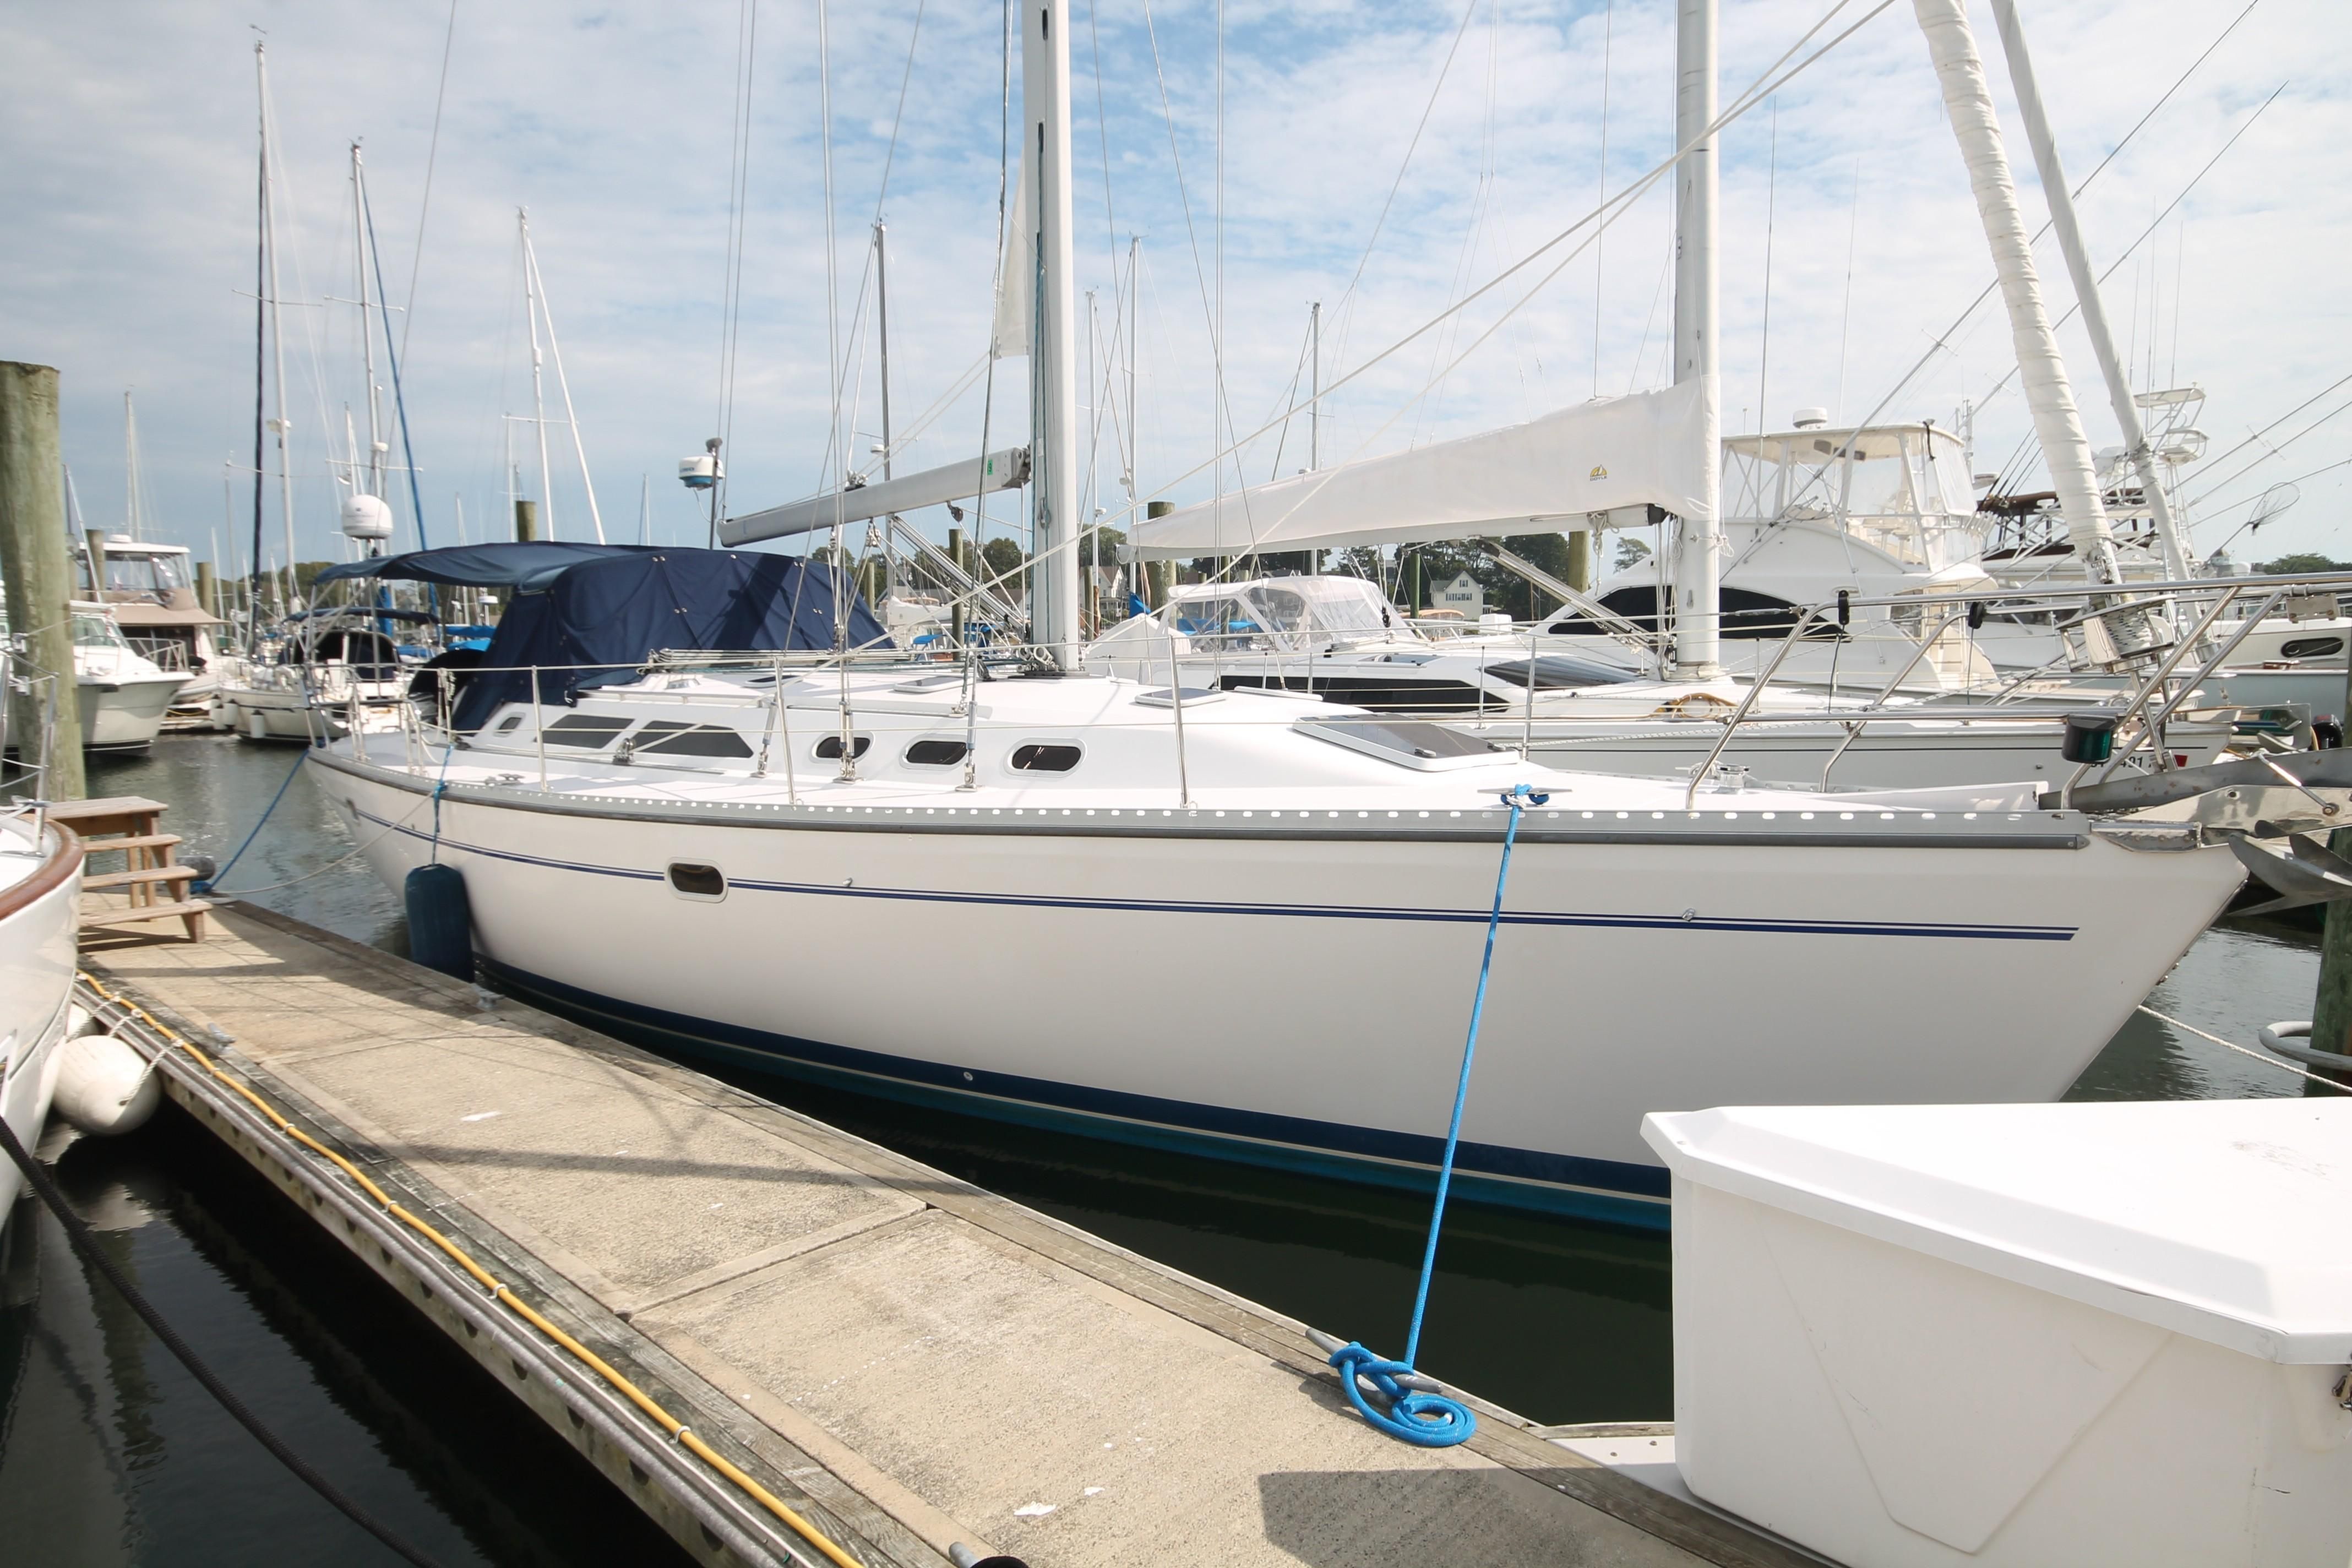 2000 Catalina 400 MkII Sail Boat For Sale - www.yachtworld.com